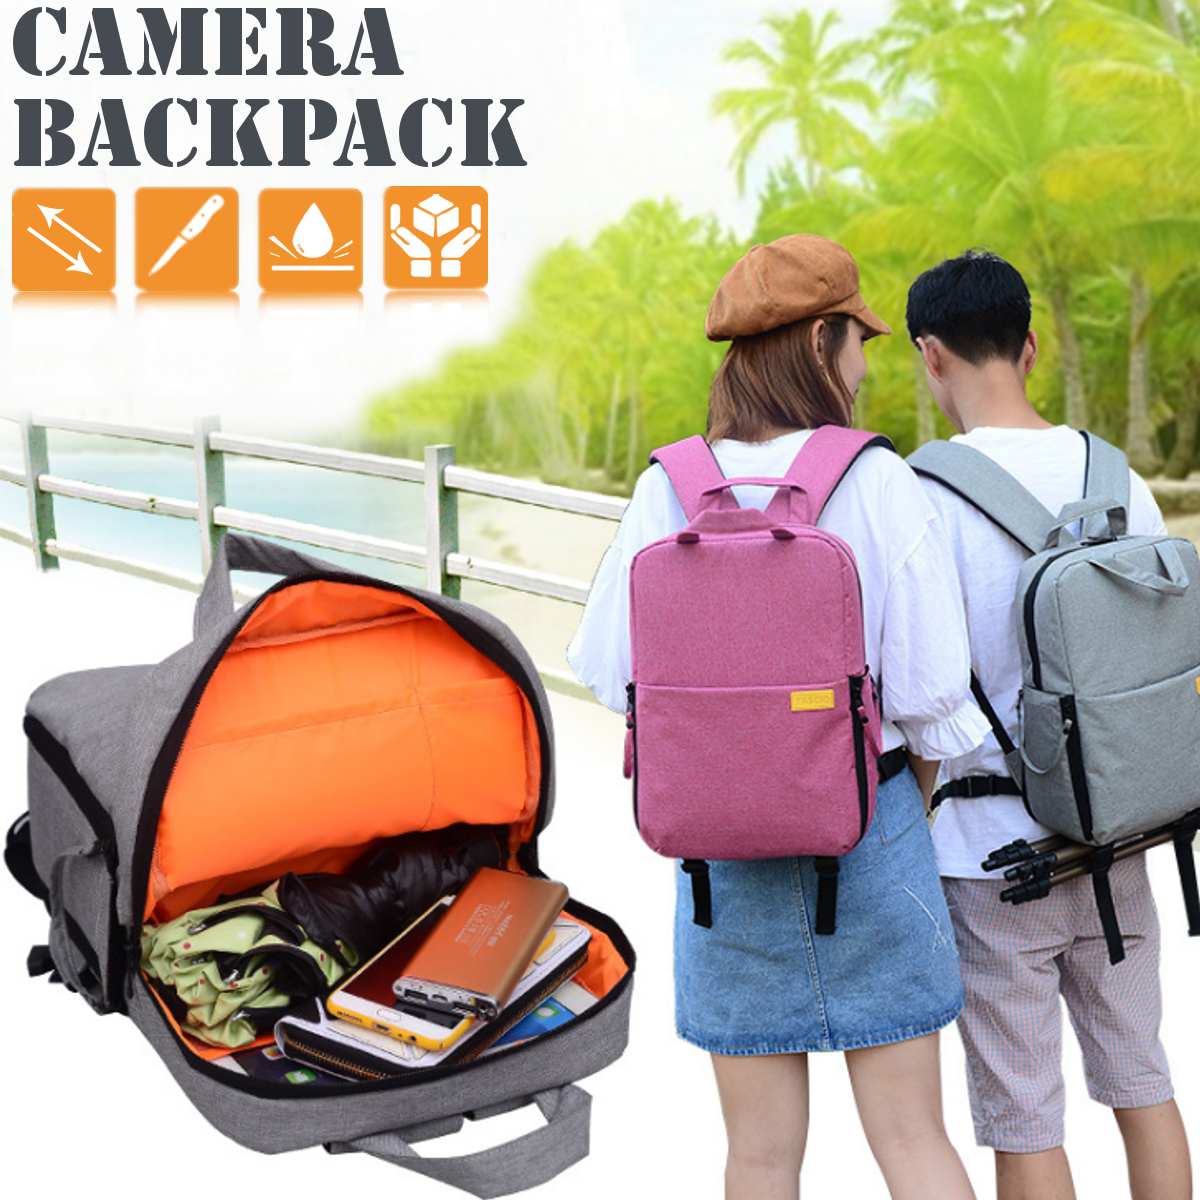 YACIO-Water-Resistant-Backpack-for-DSLR-Camera-Lens-Accessories-with-Insert-Bag-Rain-Cover-1420250-1